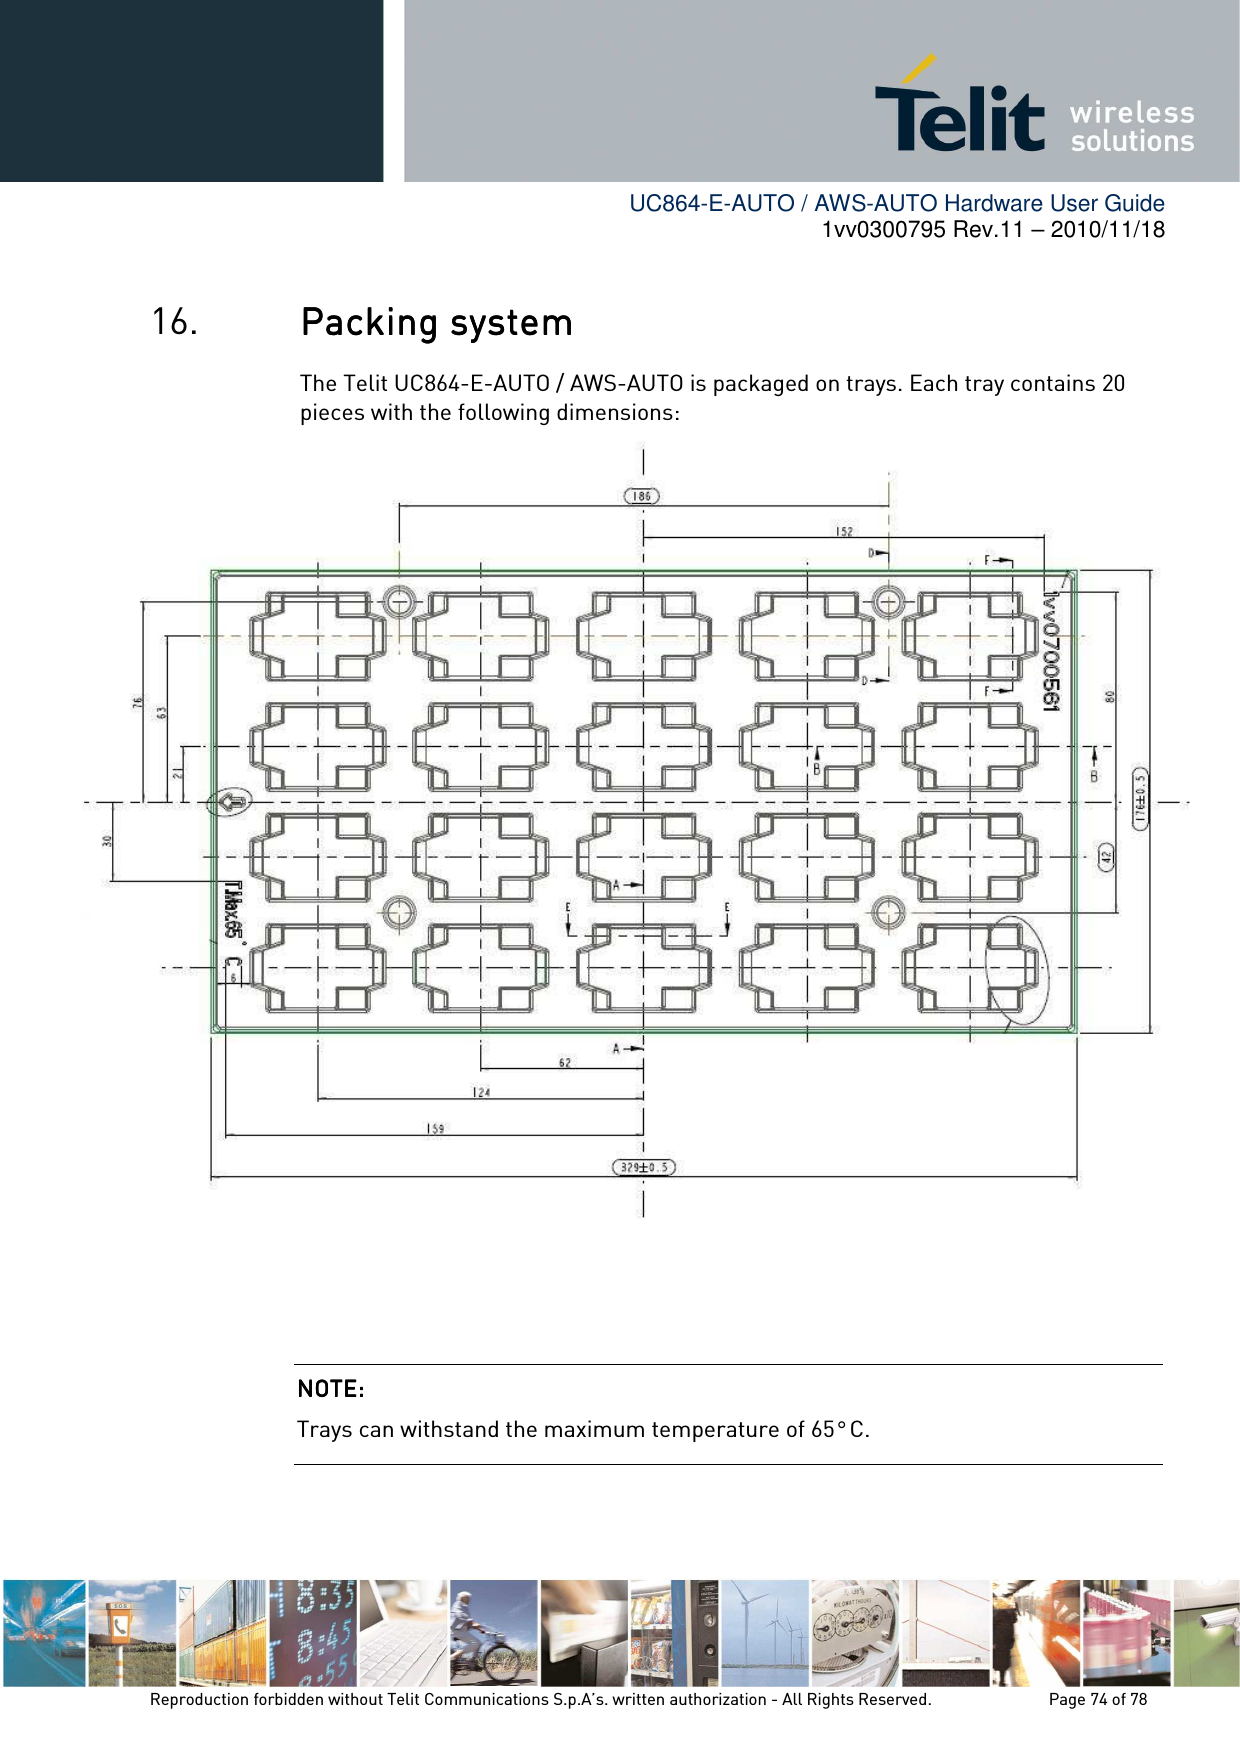        UC864-E-AUTO / AWS-AUTO Hardware User Guide 1vv0300795 Rev.11 – 2010/11/18     Reproduction forbidden without Telit Communications S.p.A’s. written authorization - All Rights Reserved.    Page 74 of 78  16. PacPacPacPackkkking systeming systeming systeming system    The Telit UC864-E-AUTO / AWS-AUTO is packaged on trays. Each tray contains 20 pieces with the following dimensions:     NOTE: NOTE: NOTE: NOTE:     Trays can withstand the maximum temperature of 65° C. 